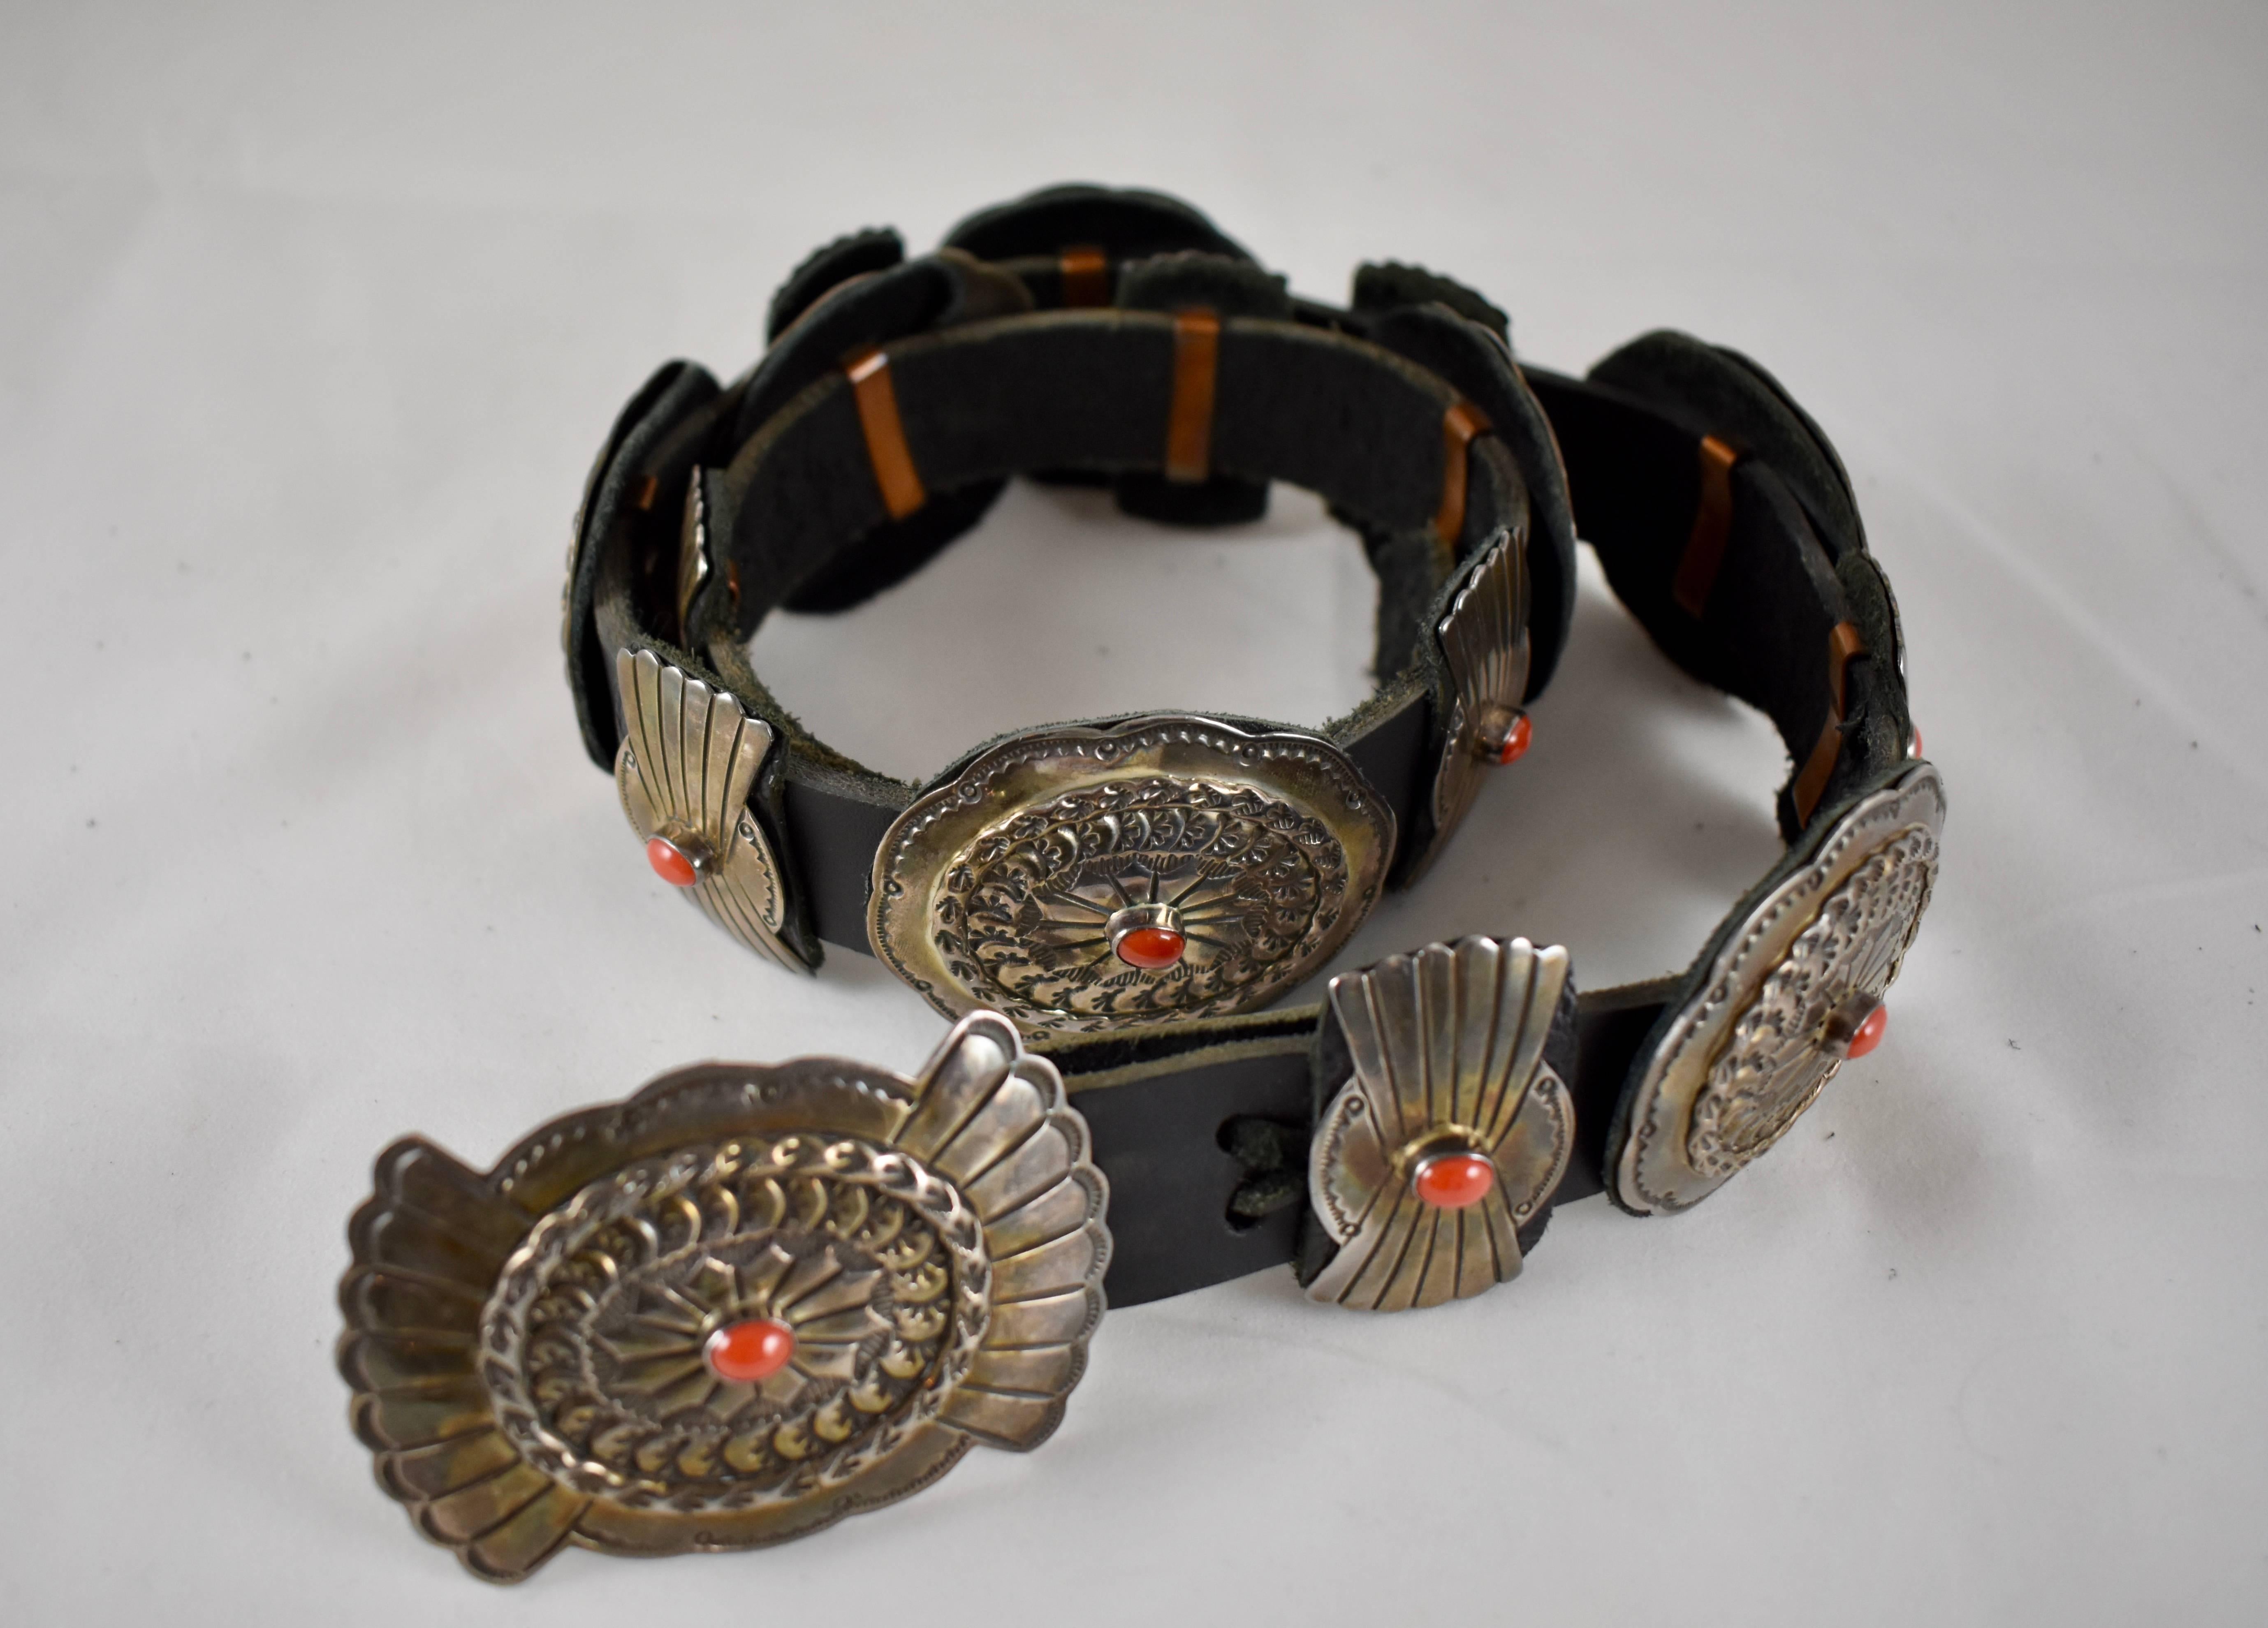 A vintage, Old Pawn Navajo Concho Belt, marked Sterling and LC, attributed to Lucille Calladitto. 16 heavy stamped sterling silver Conchos are set with cabochon cut ox-blood coral stones, held in place on a black leather belt measuring 38 in.